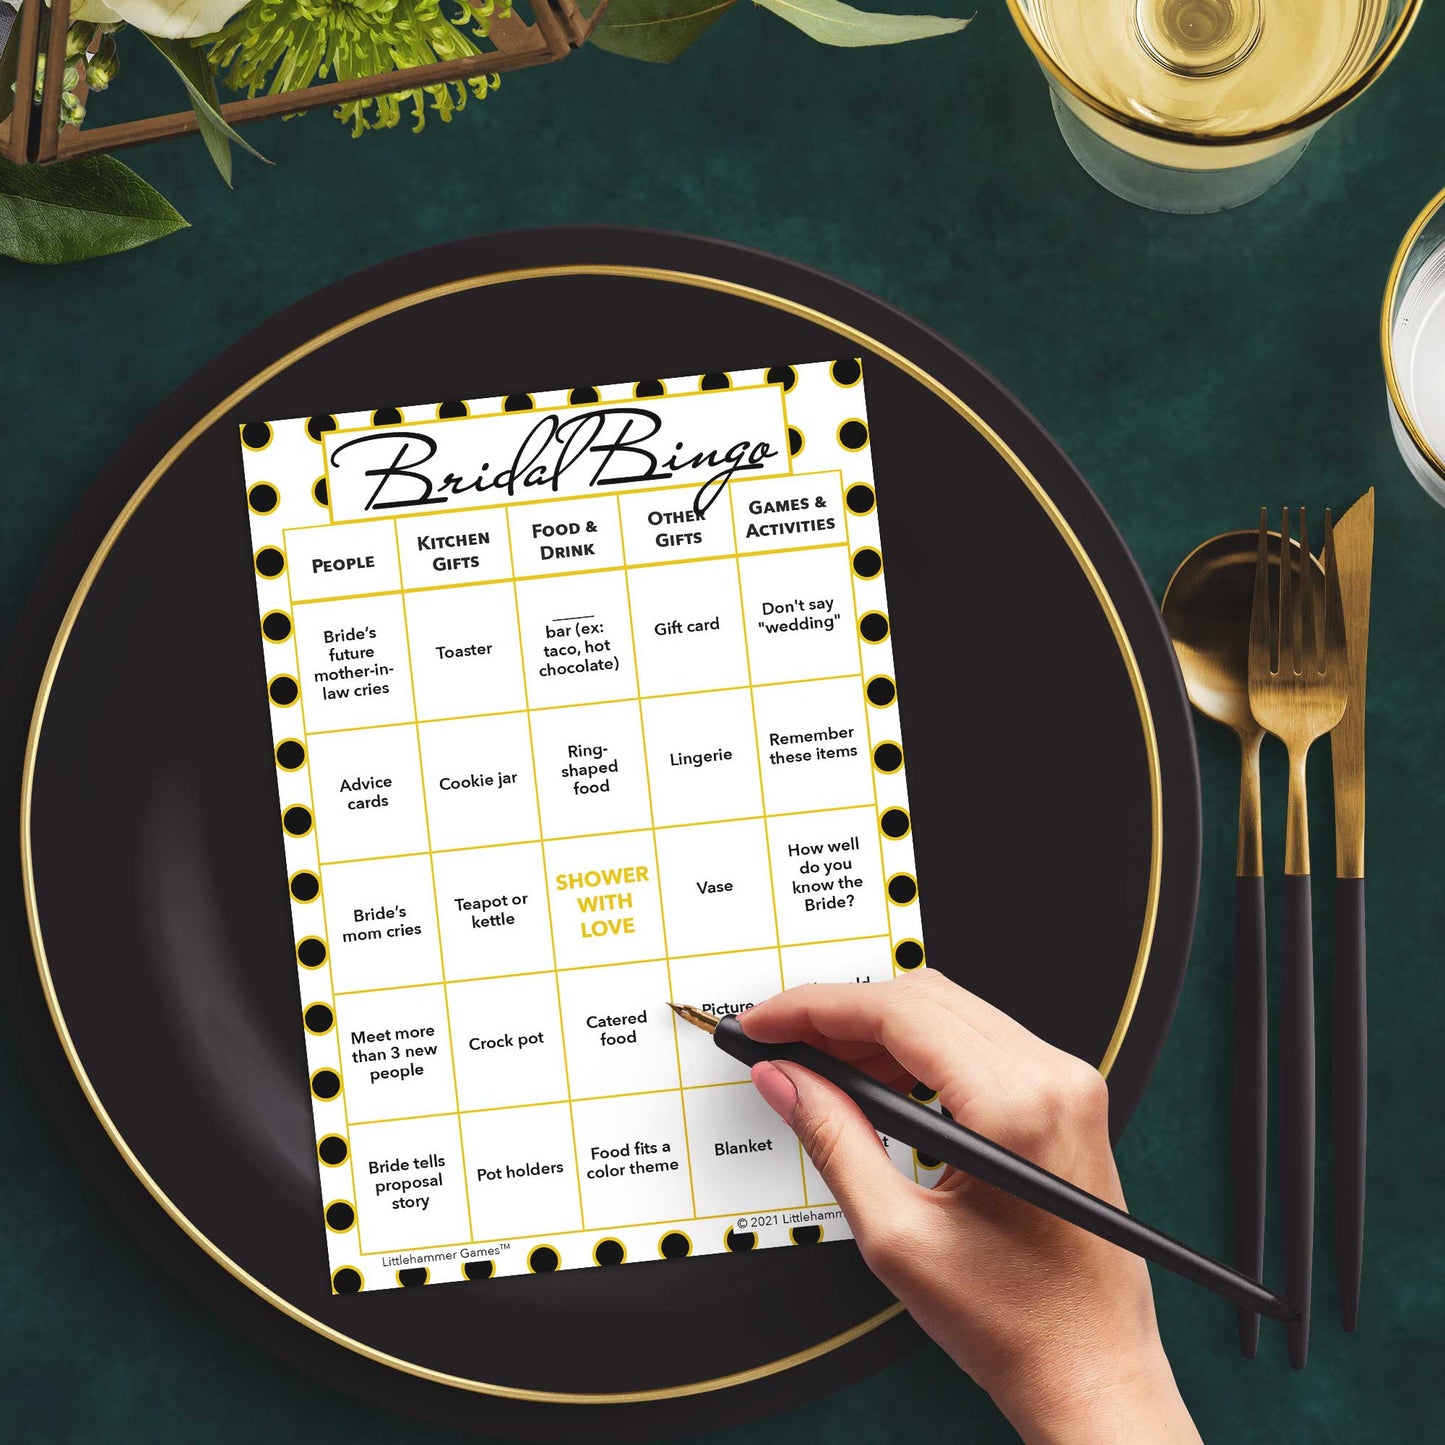 Woman with a pen sitting at a table with a black and gold polka dot Bridal Bingo game card on a black and gold plate at a dark place setting